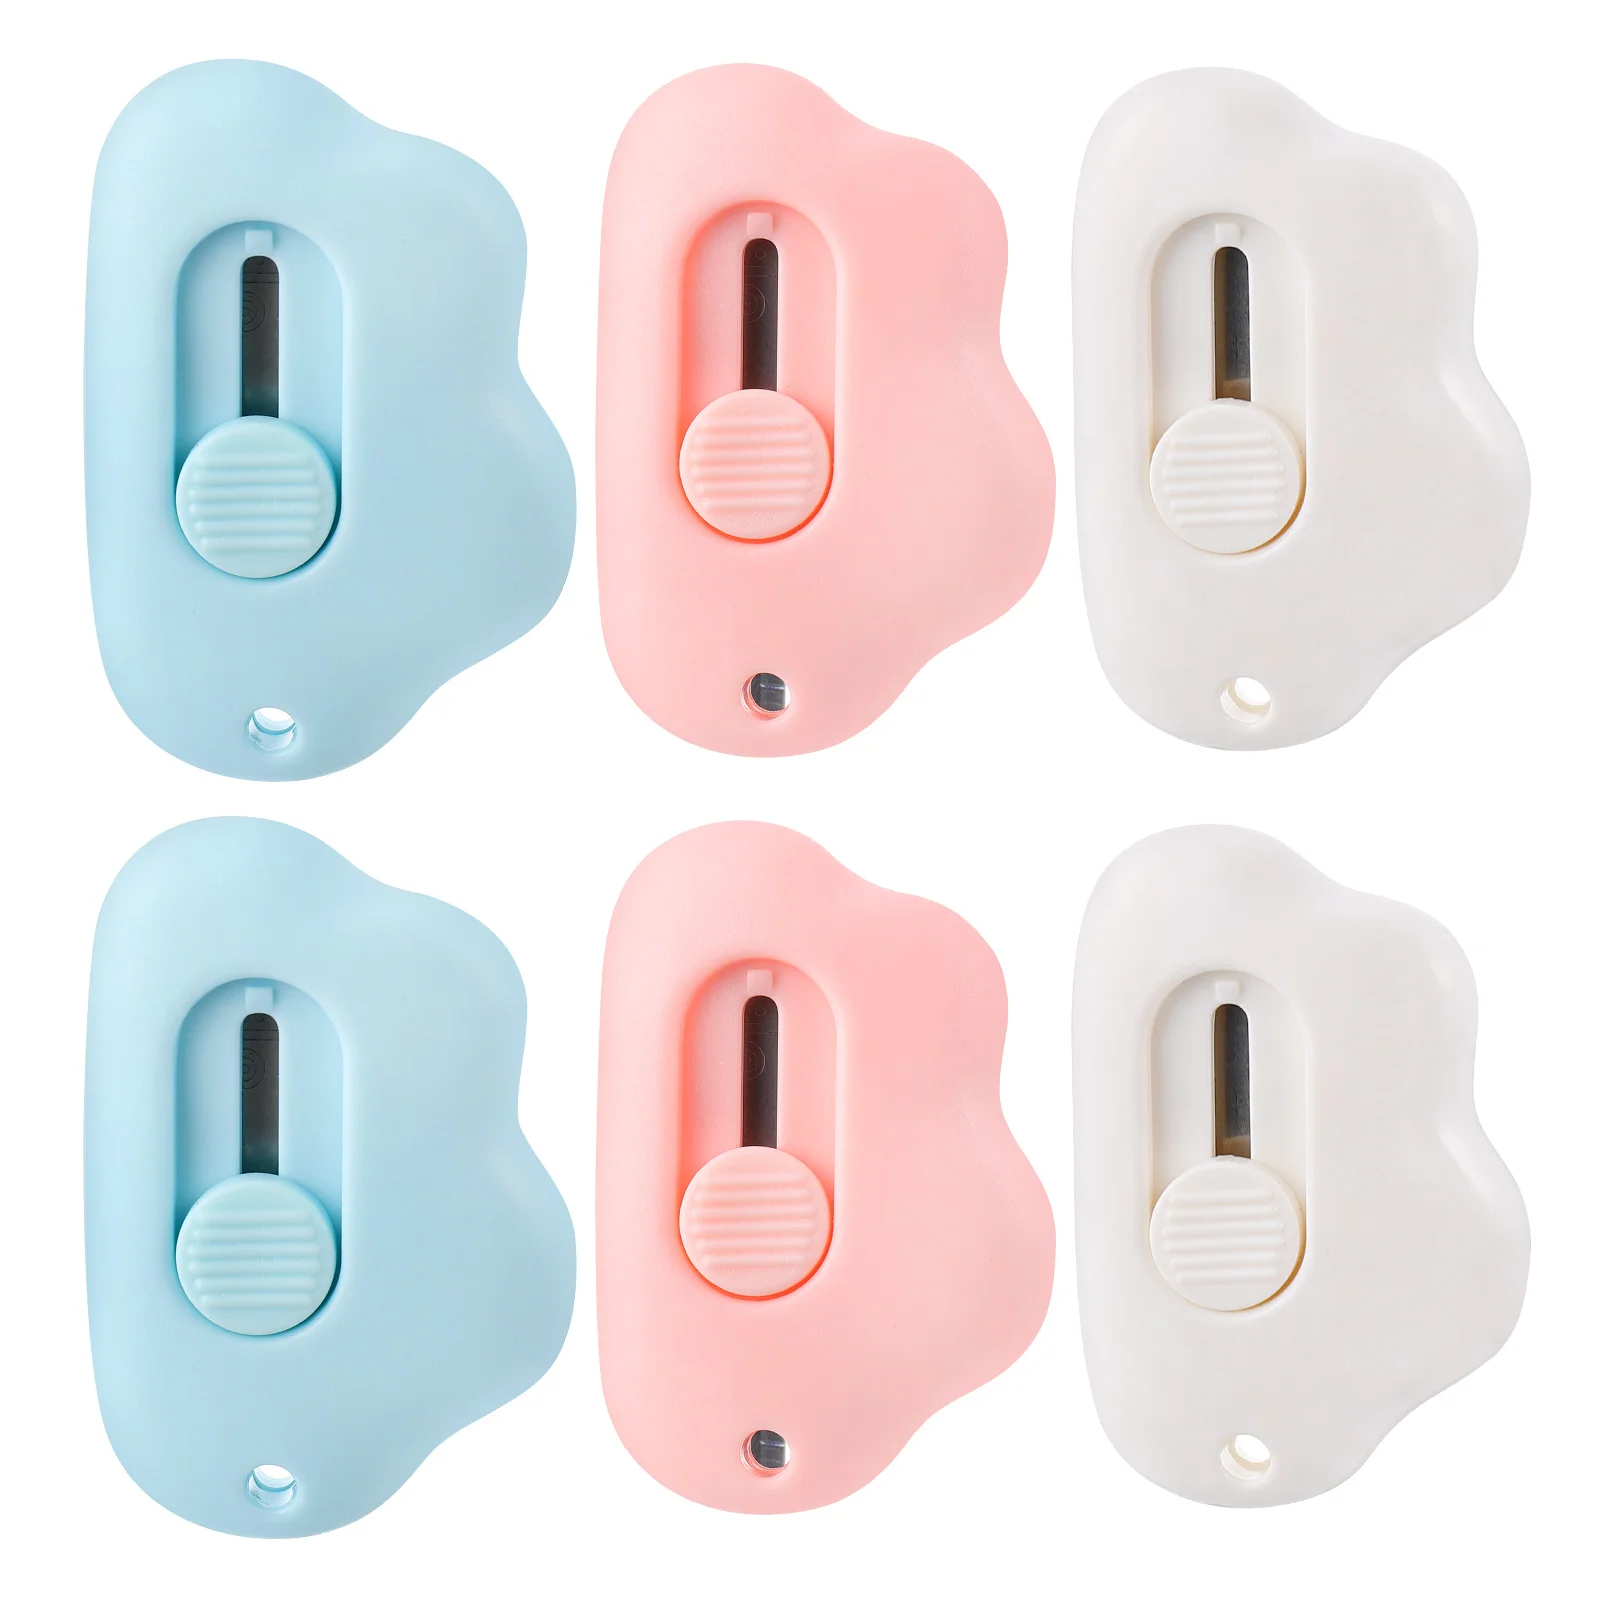 

Box Mini Utility Opener Retractable Keychain Folding Cute Package Slice Ceramic Chain Key Letter Safety Telescopic Tool Openers